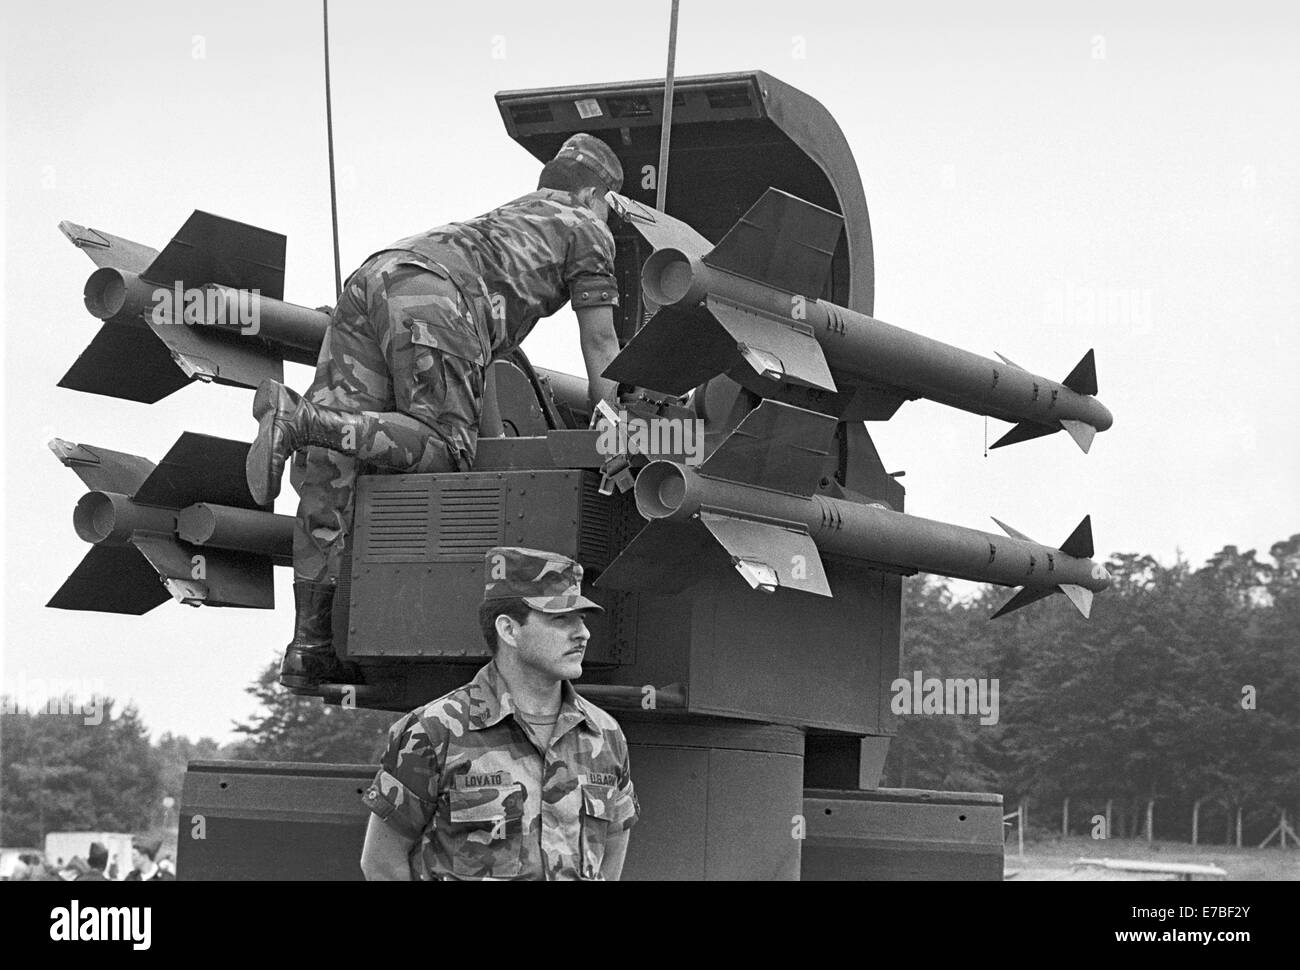 Missile launcher Black and White Stock Photos & Images - Alamy